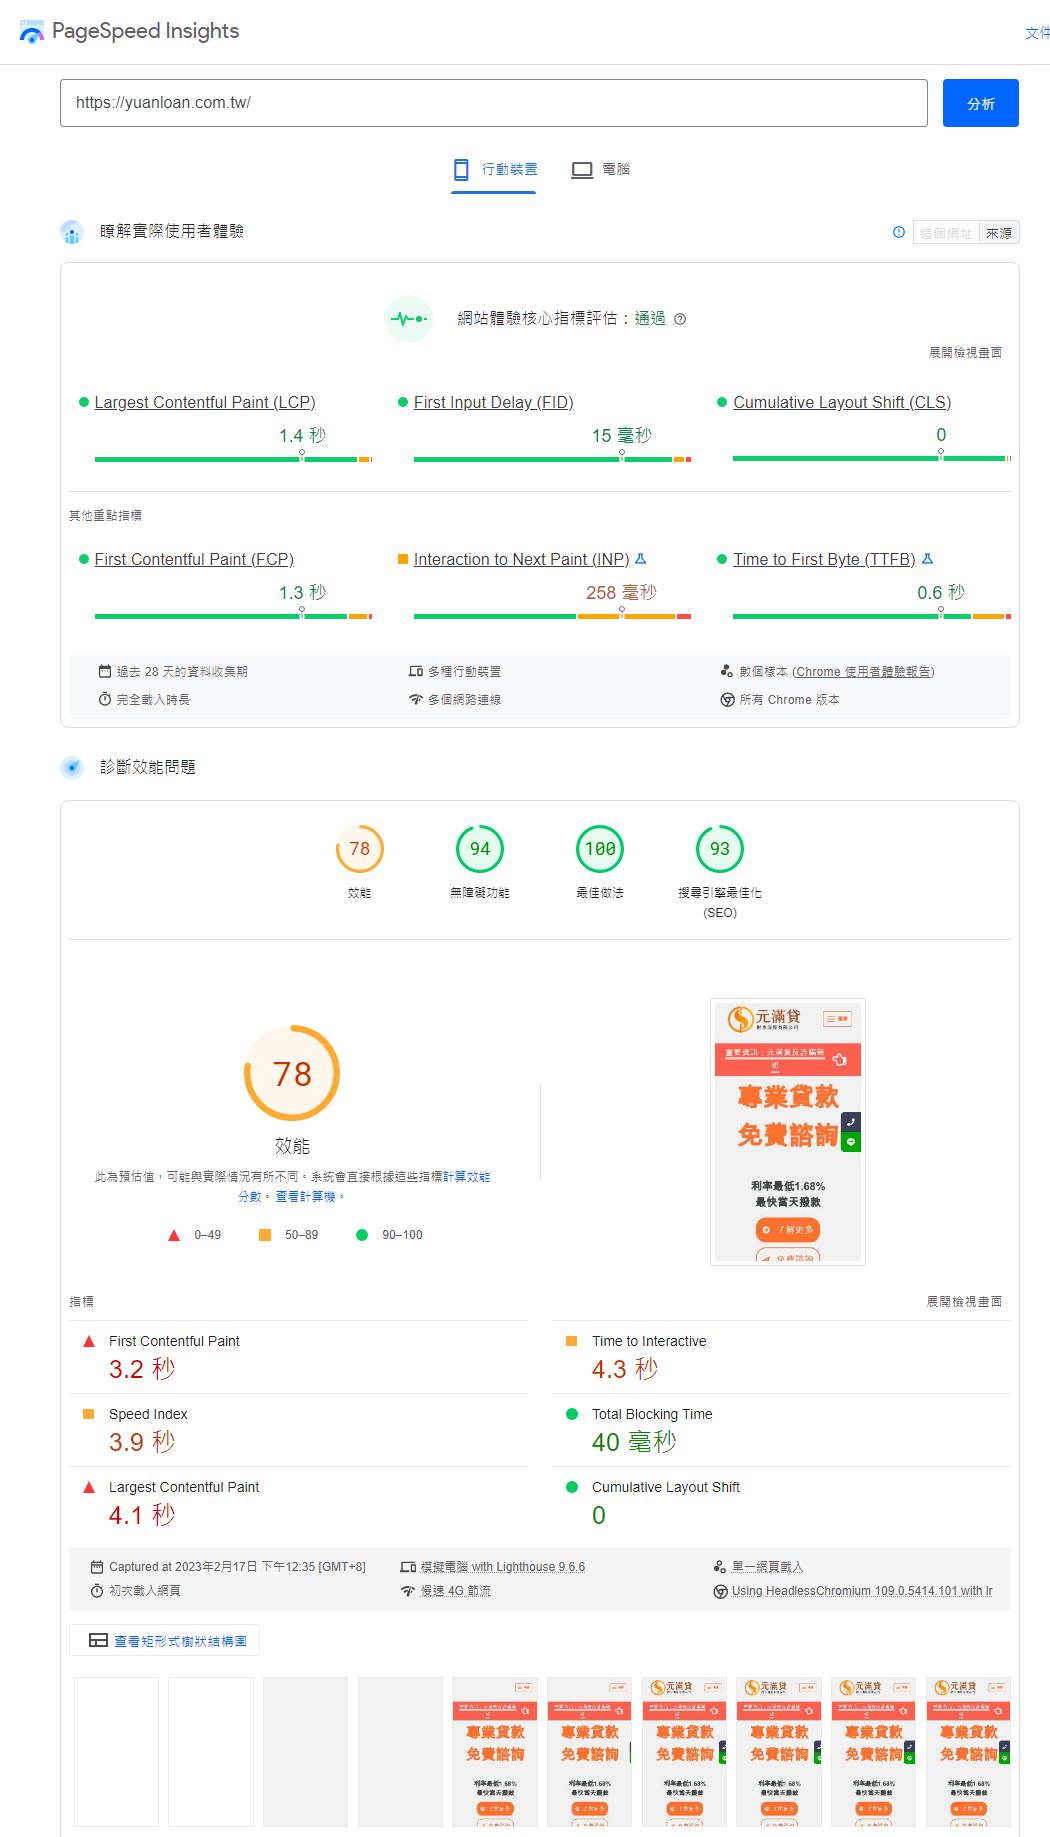 yuanloan.com.tw - PageSpeed Insight (Mobile) &amp; Web Core Vitals (17 Feb, 2023)